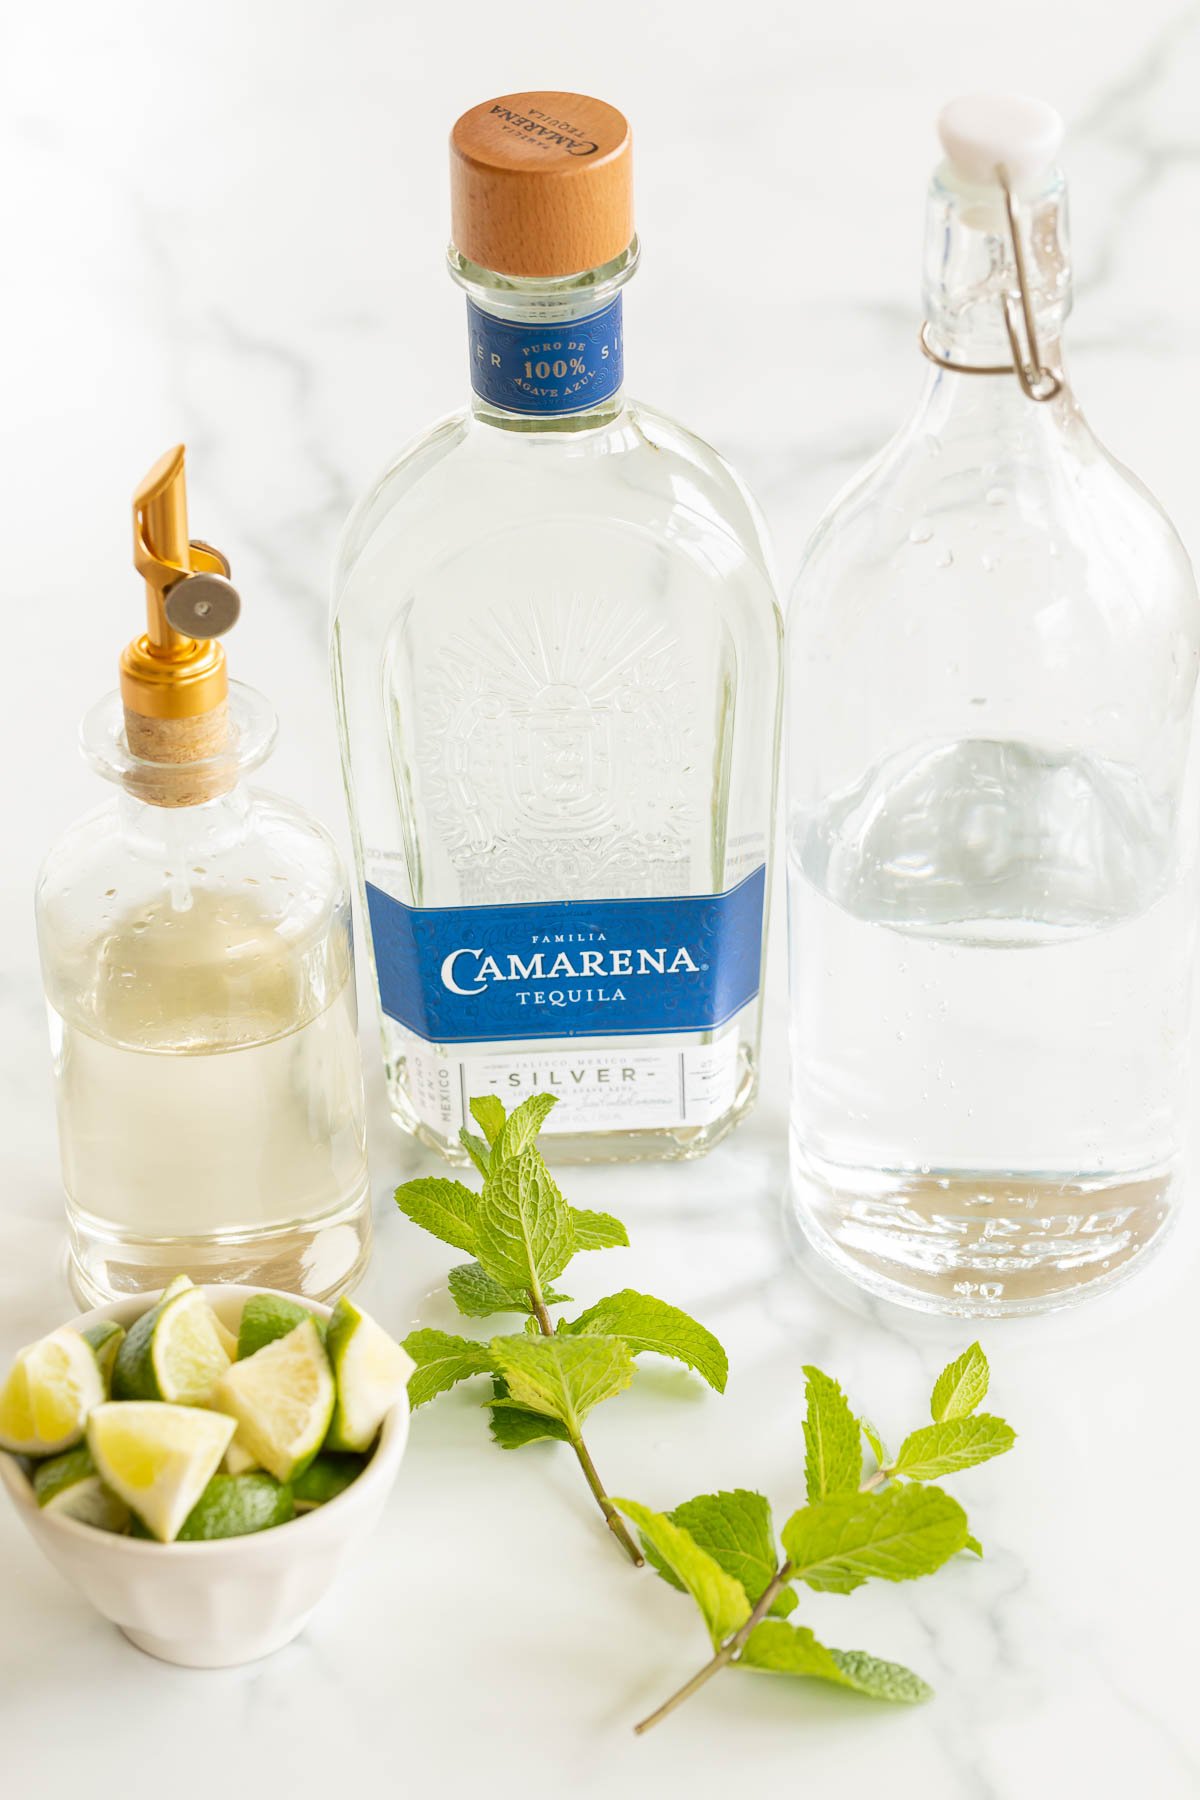 A bottle of Camarena silver tequila, a jug of clear liquid with a stopper, a dispenser with lime juice, and a bowl of lime wedges and mint leaves for a tequila mojito on a marble surface.